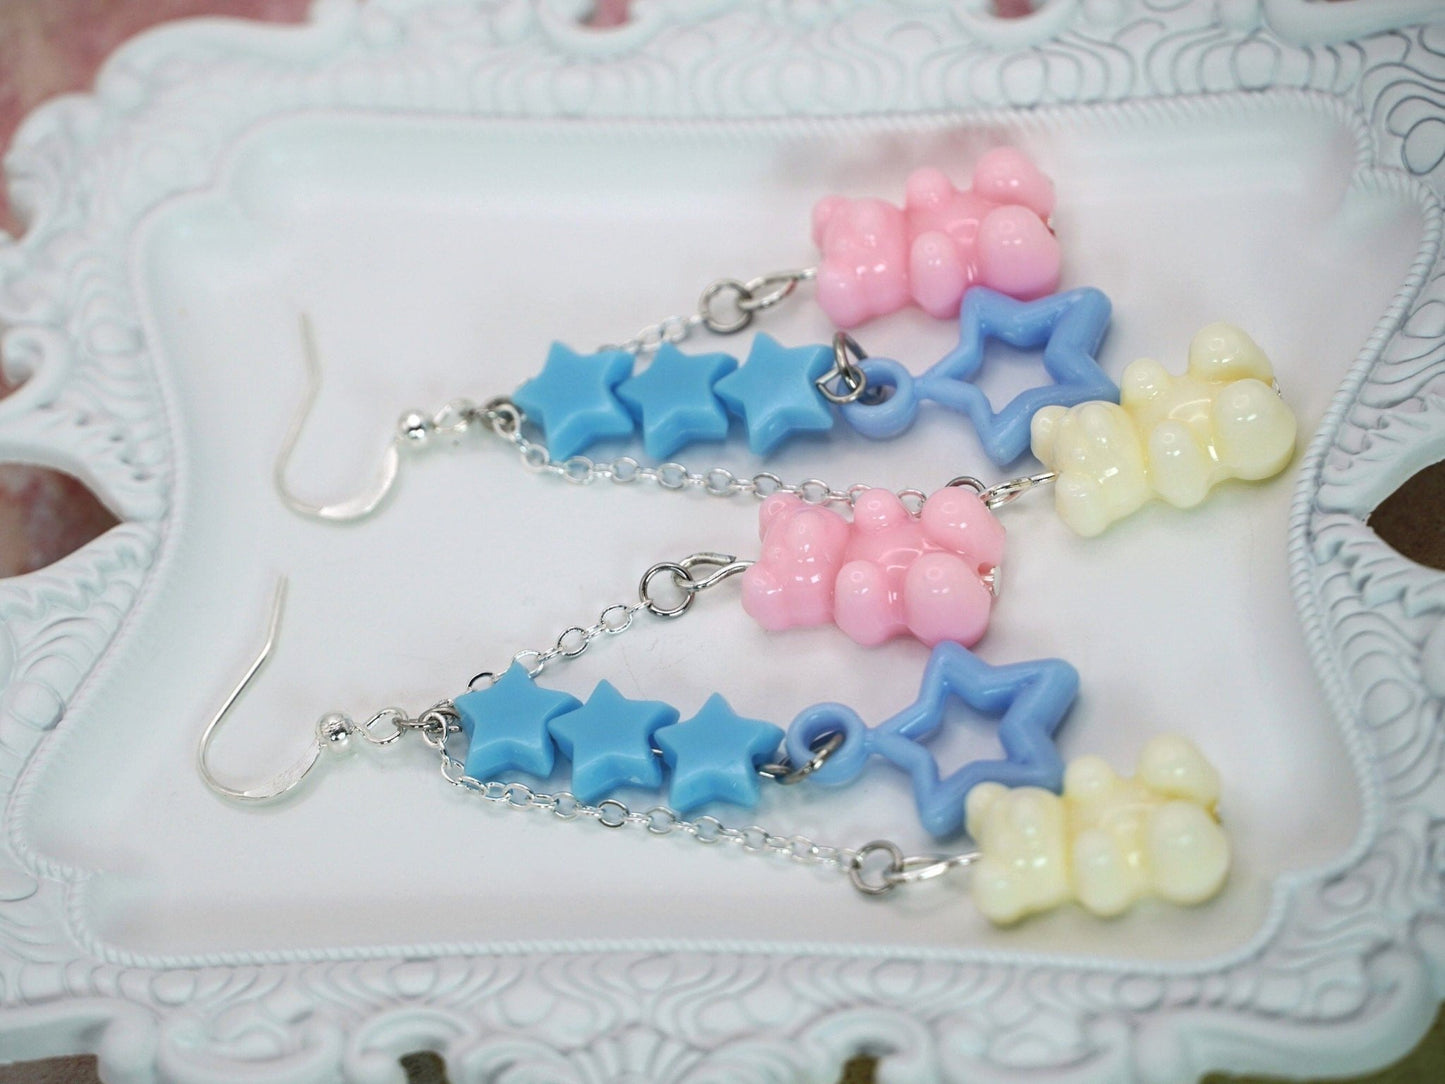 Trans Pride Pastel Gummy Bear Earrings, Trans Flag Colors, Pink and White Gummy Bears on Silver Chains, LGBT, Trans Pride Earrings - Dekowaii Jewelry Company